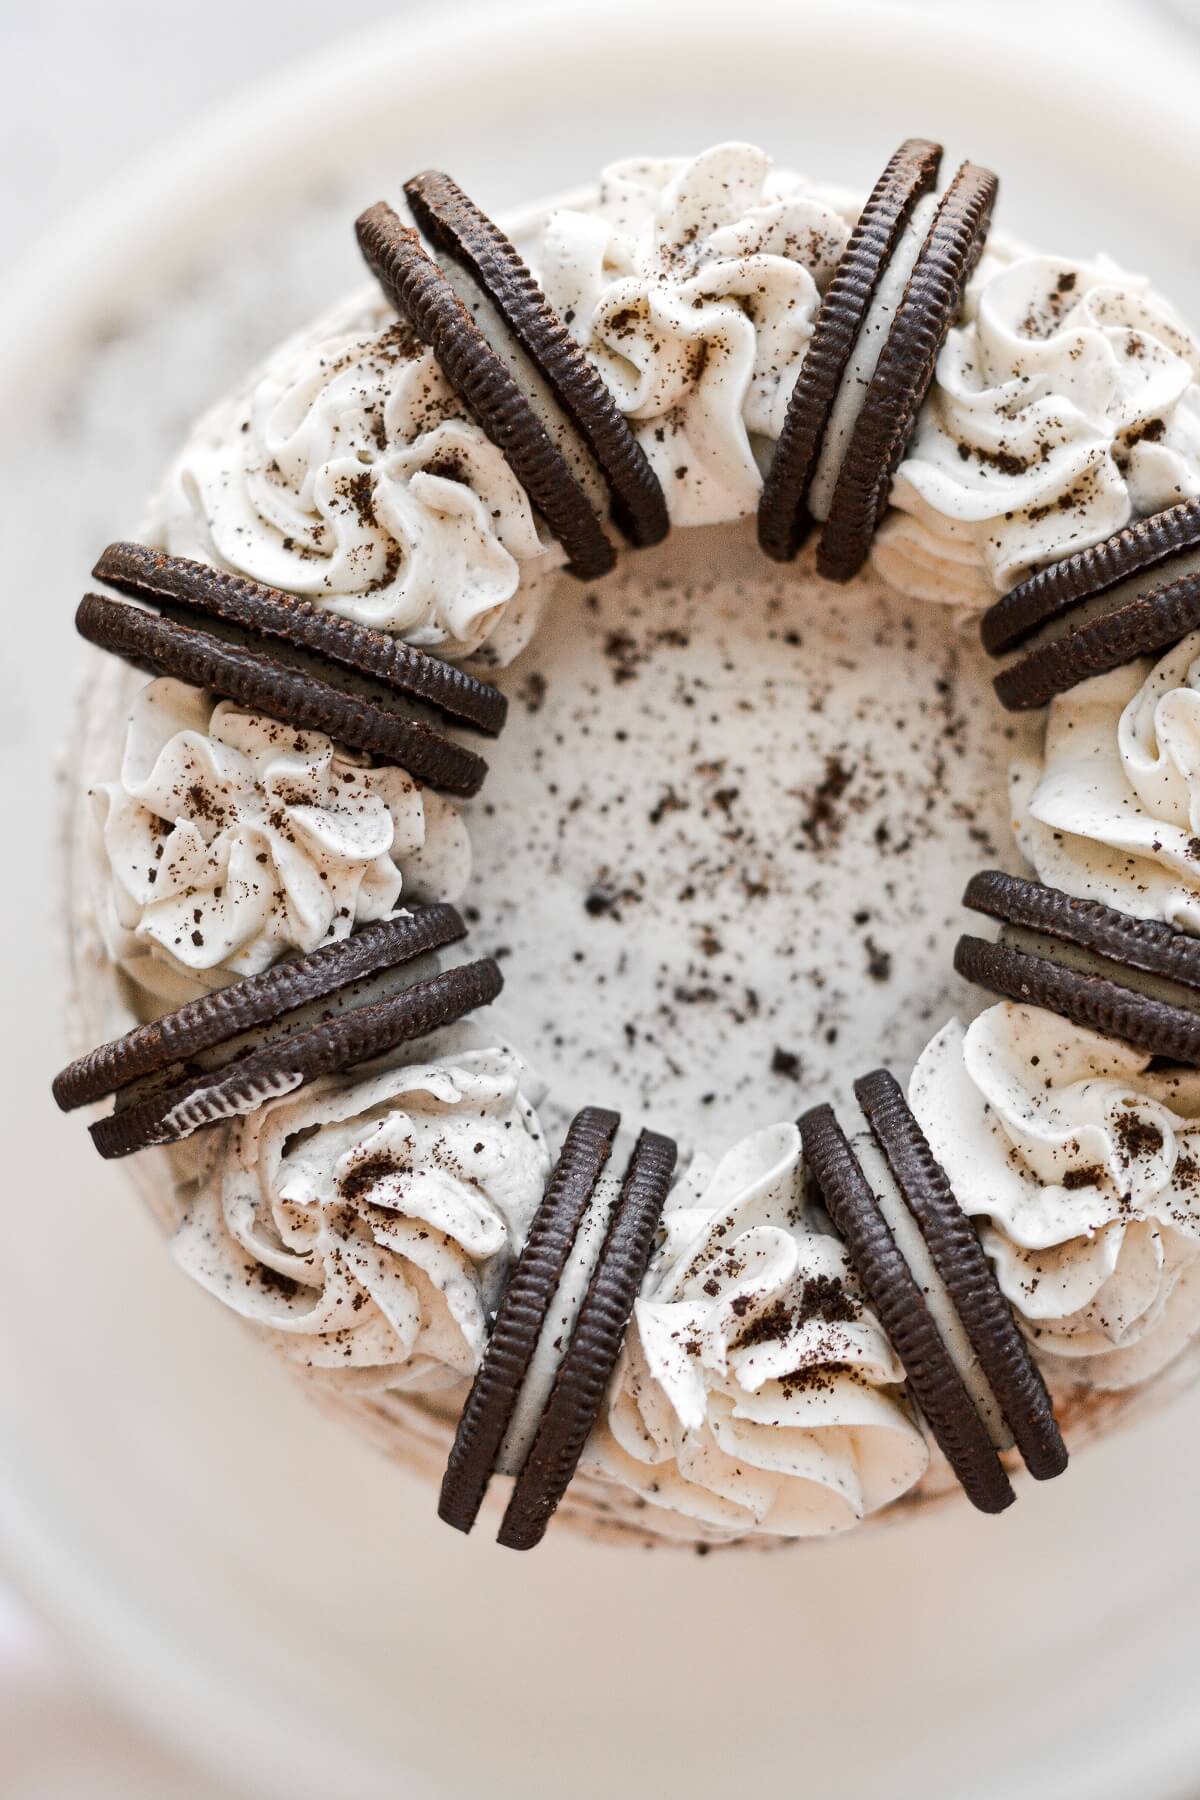 Cookies and cream cake, topped with Oreos and buttercream swirls.